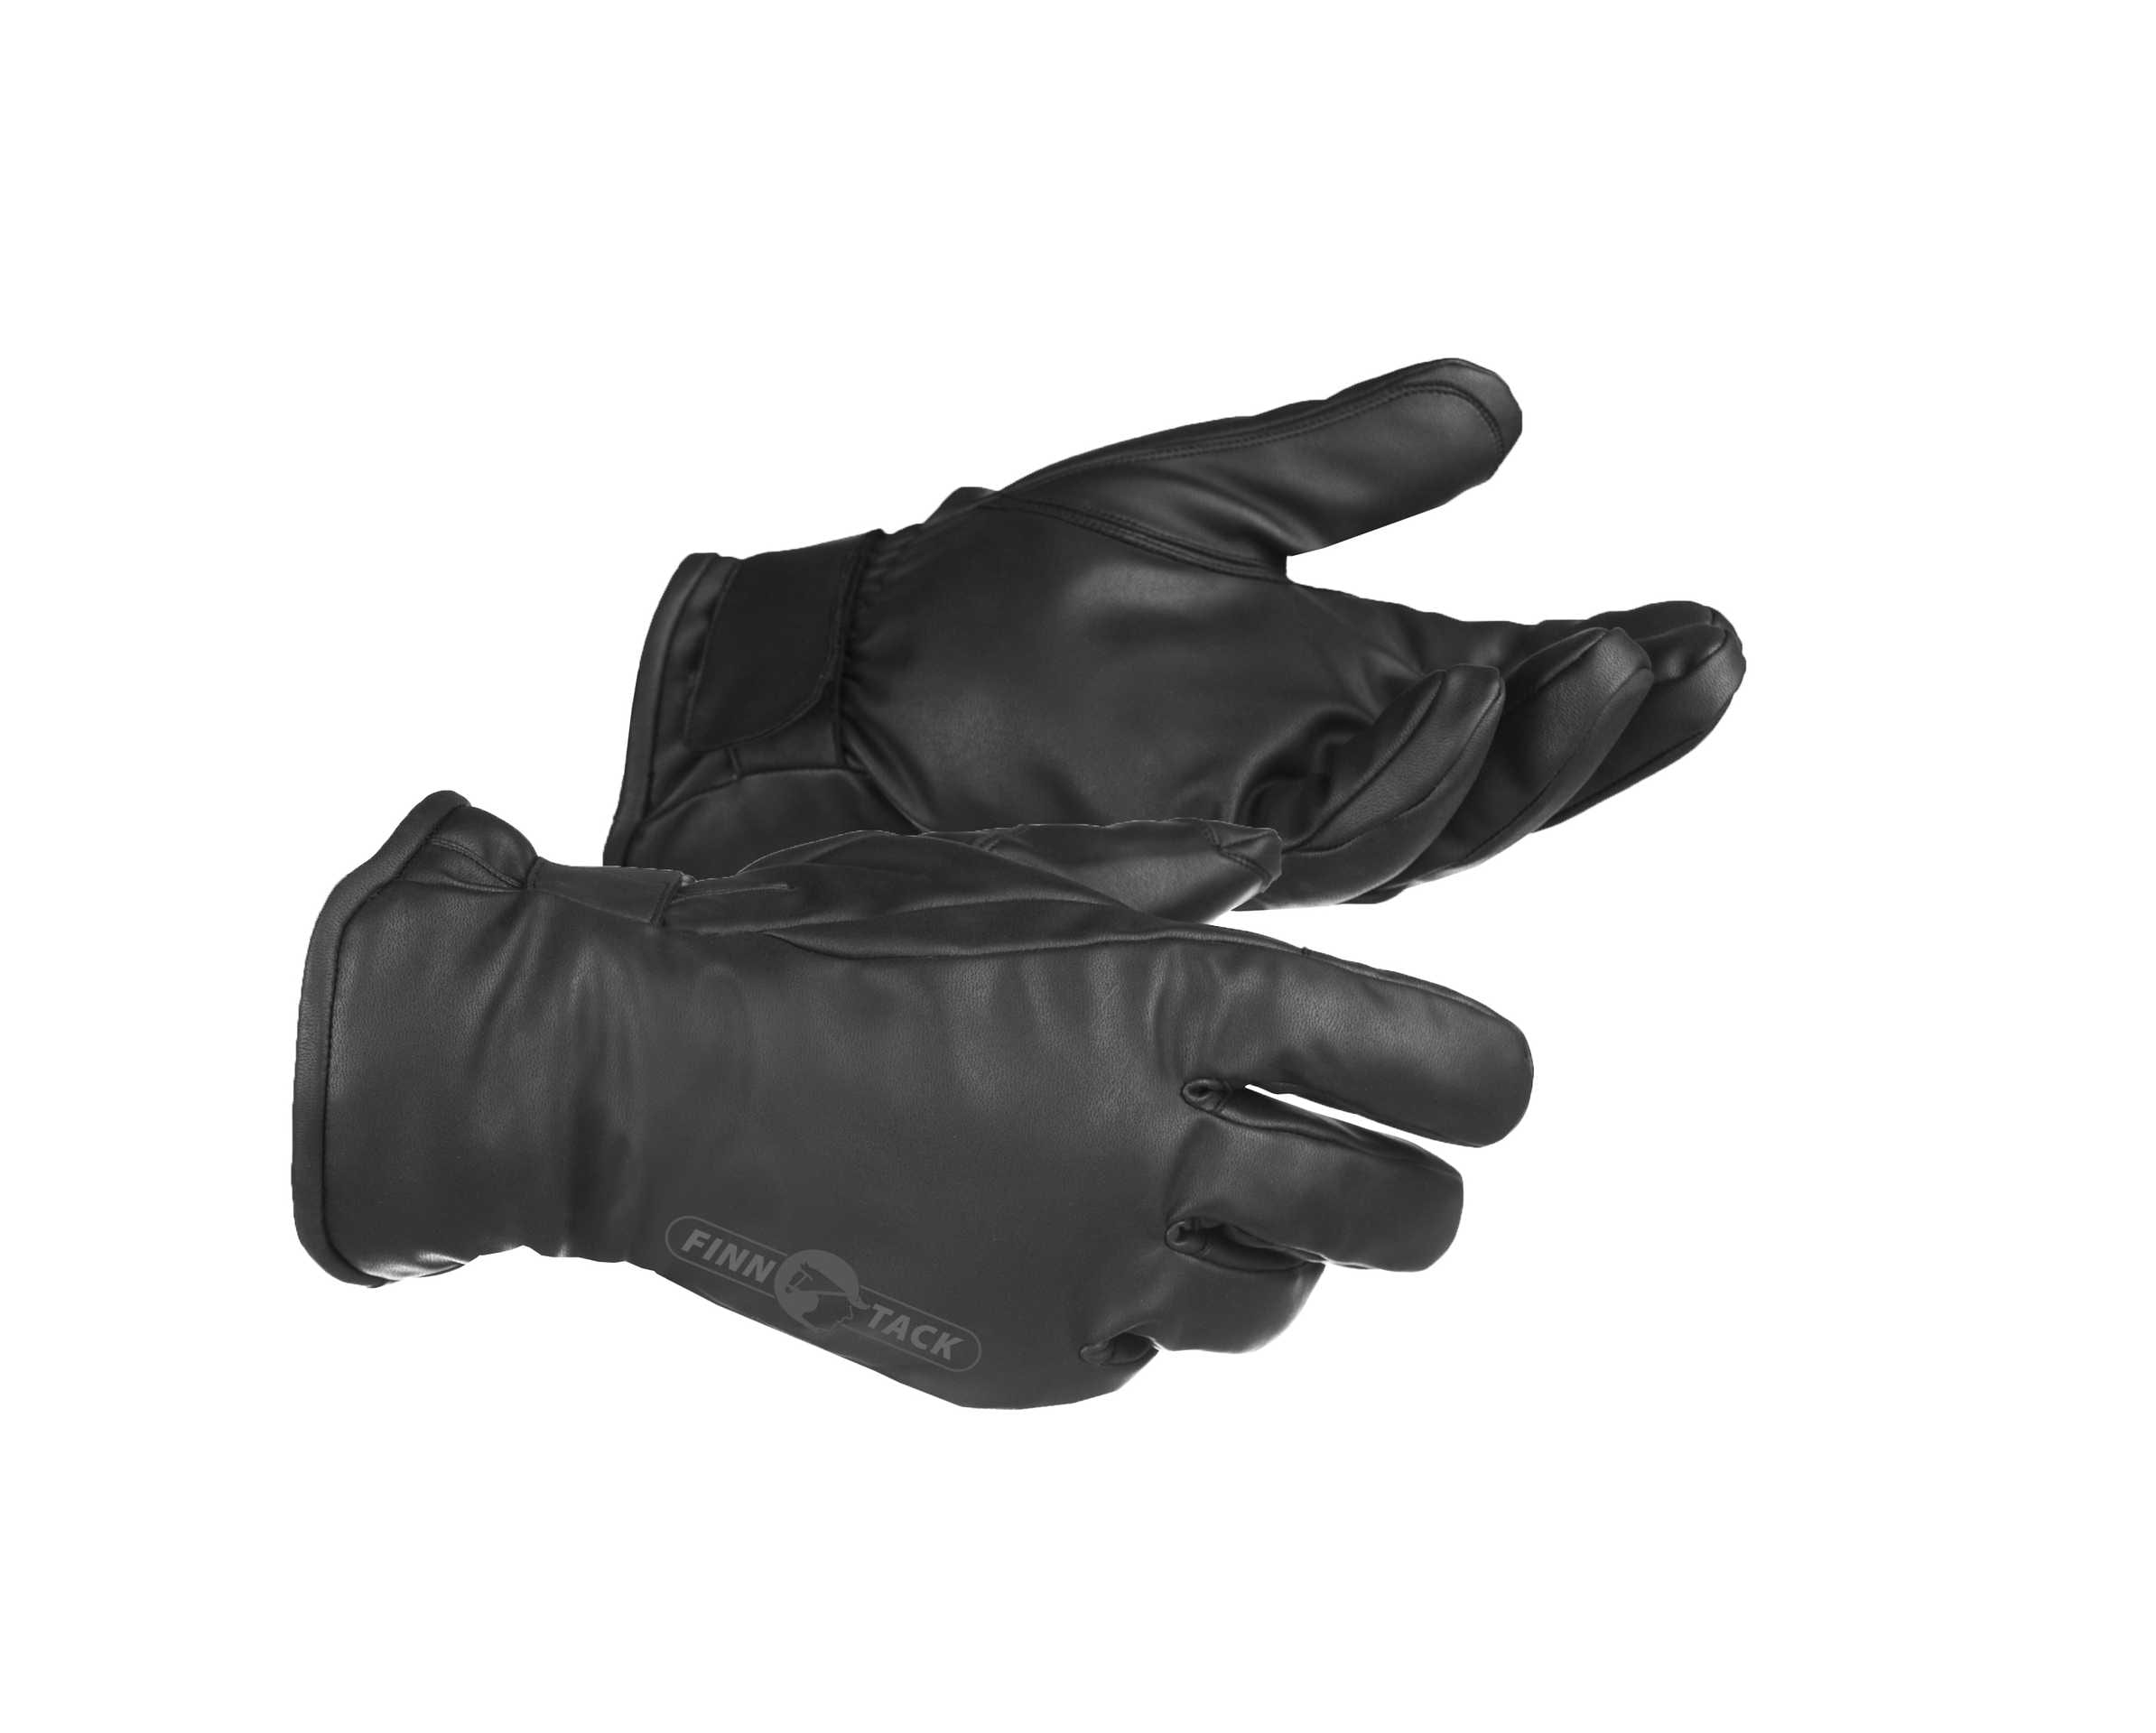 Gants synthétiques pour driver Finntack, doublure thermolyte